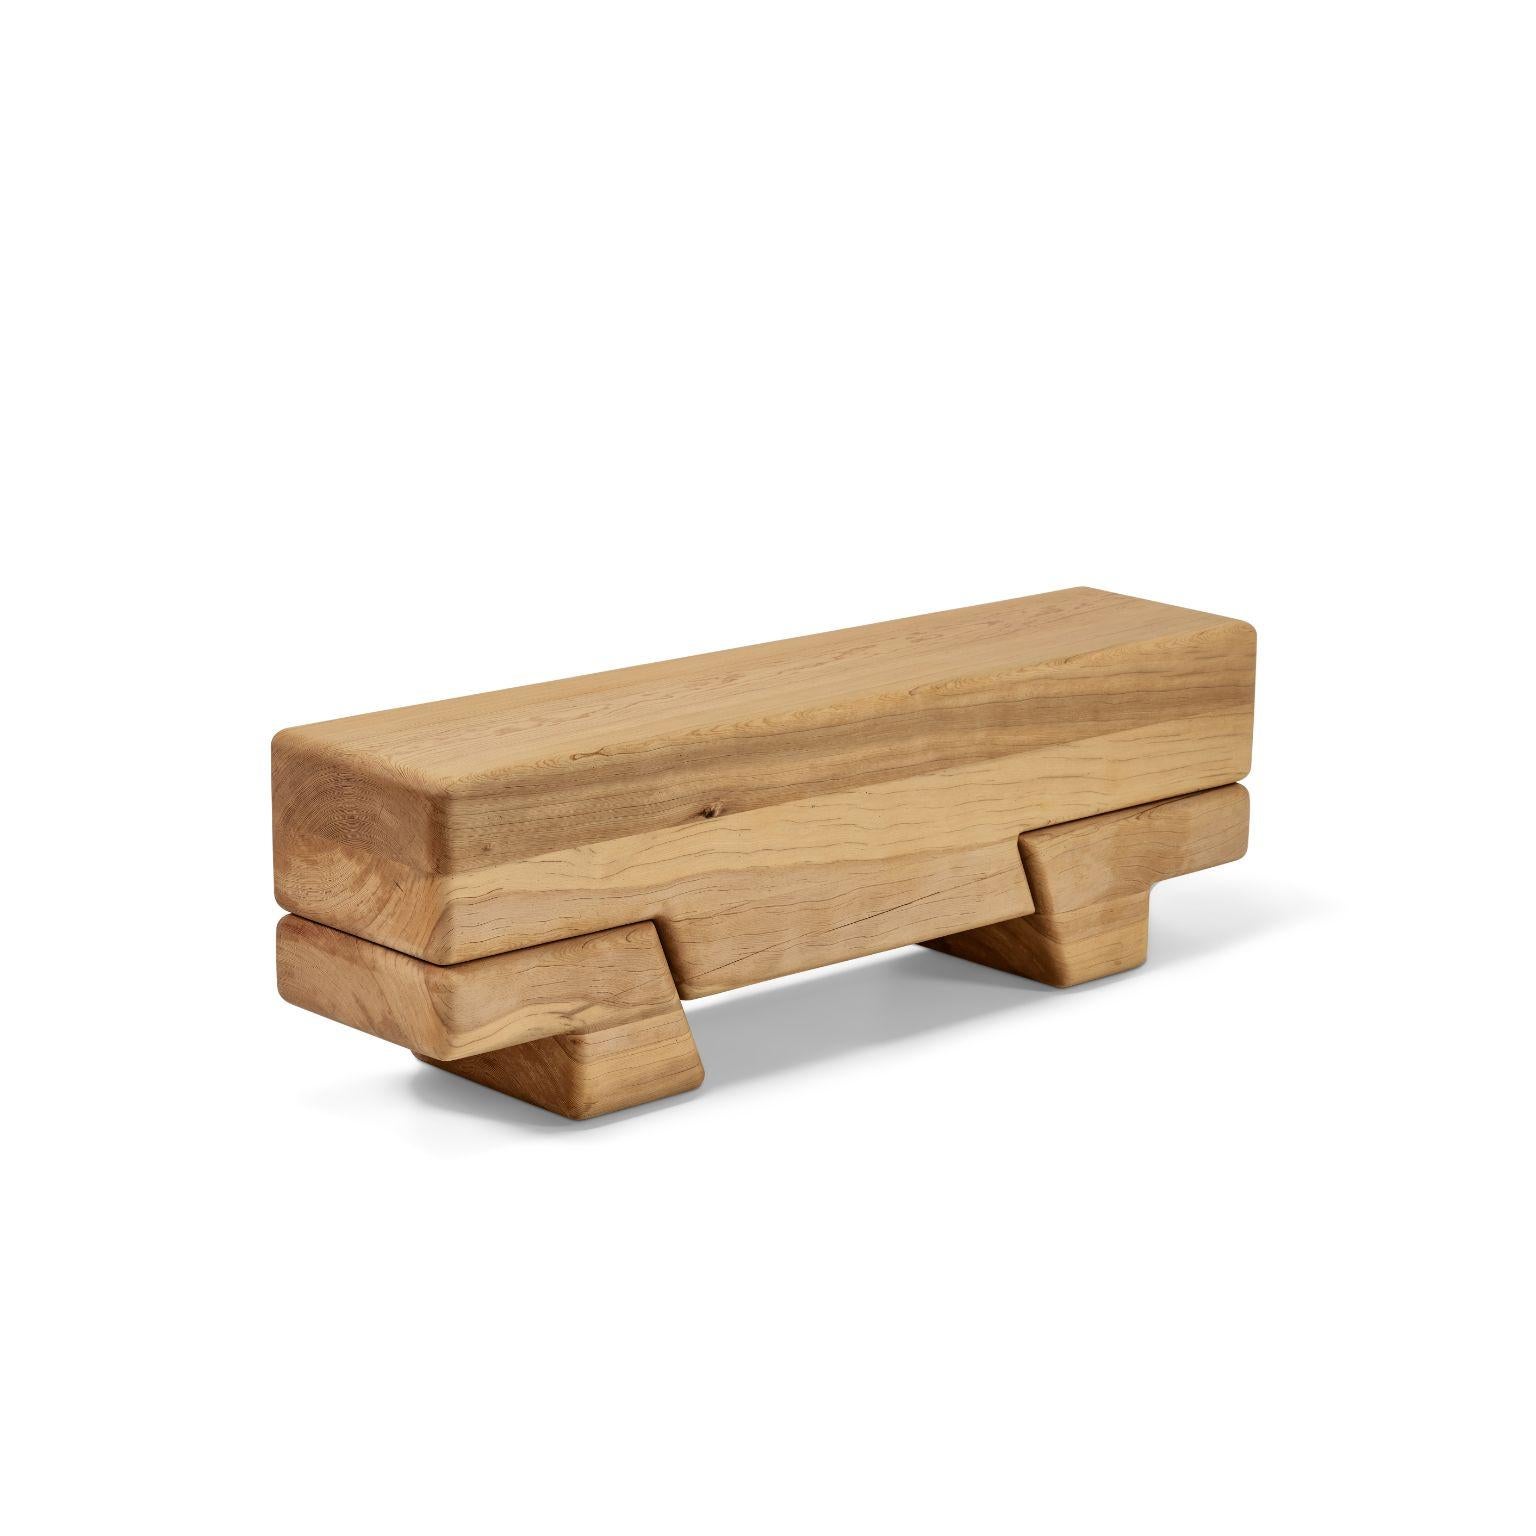 Turkish Aromatique Cedre Laminated Bench by Contemporary Ecowood For Sale